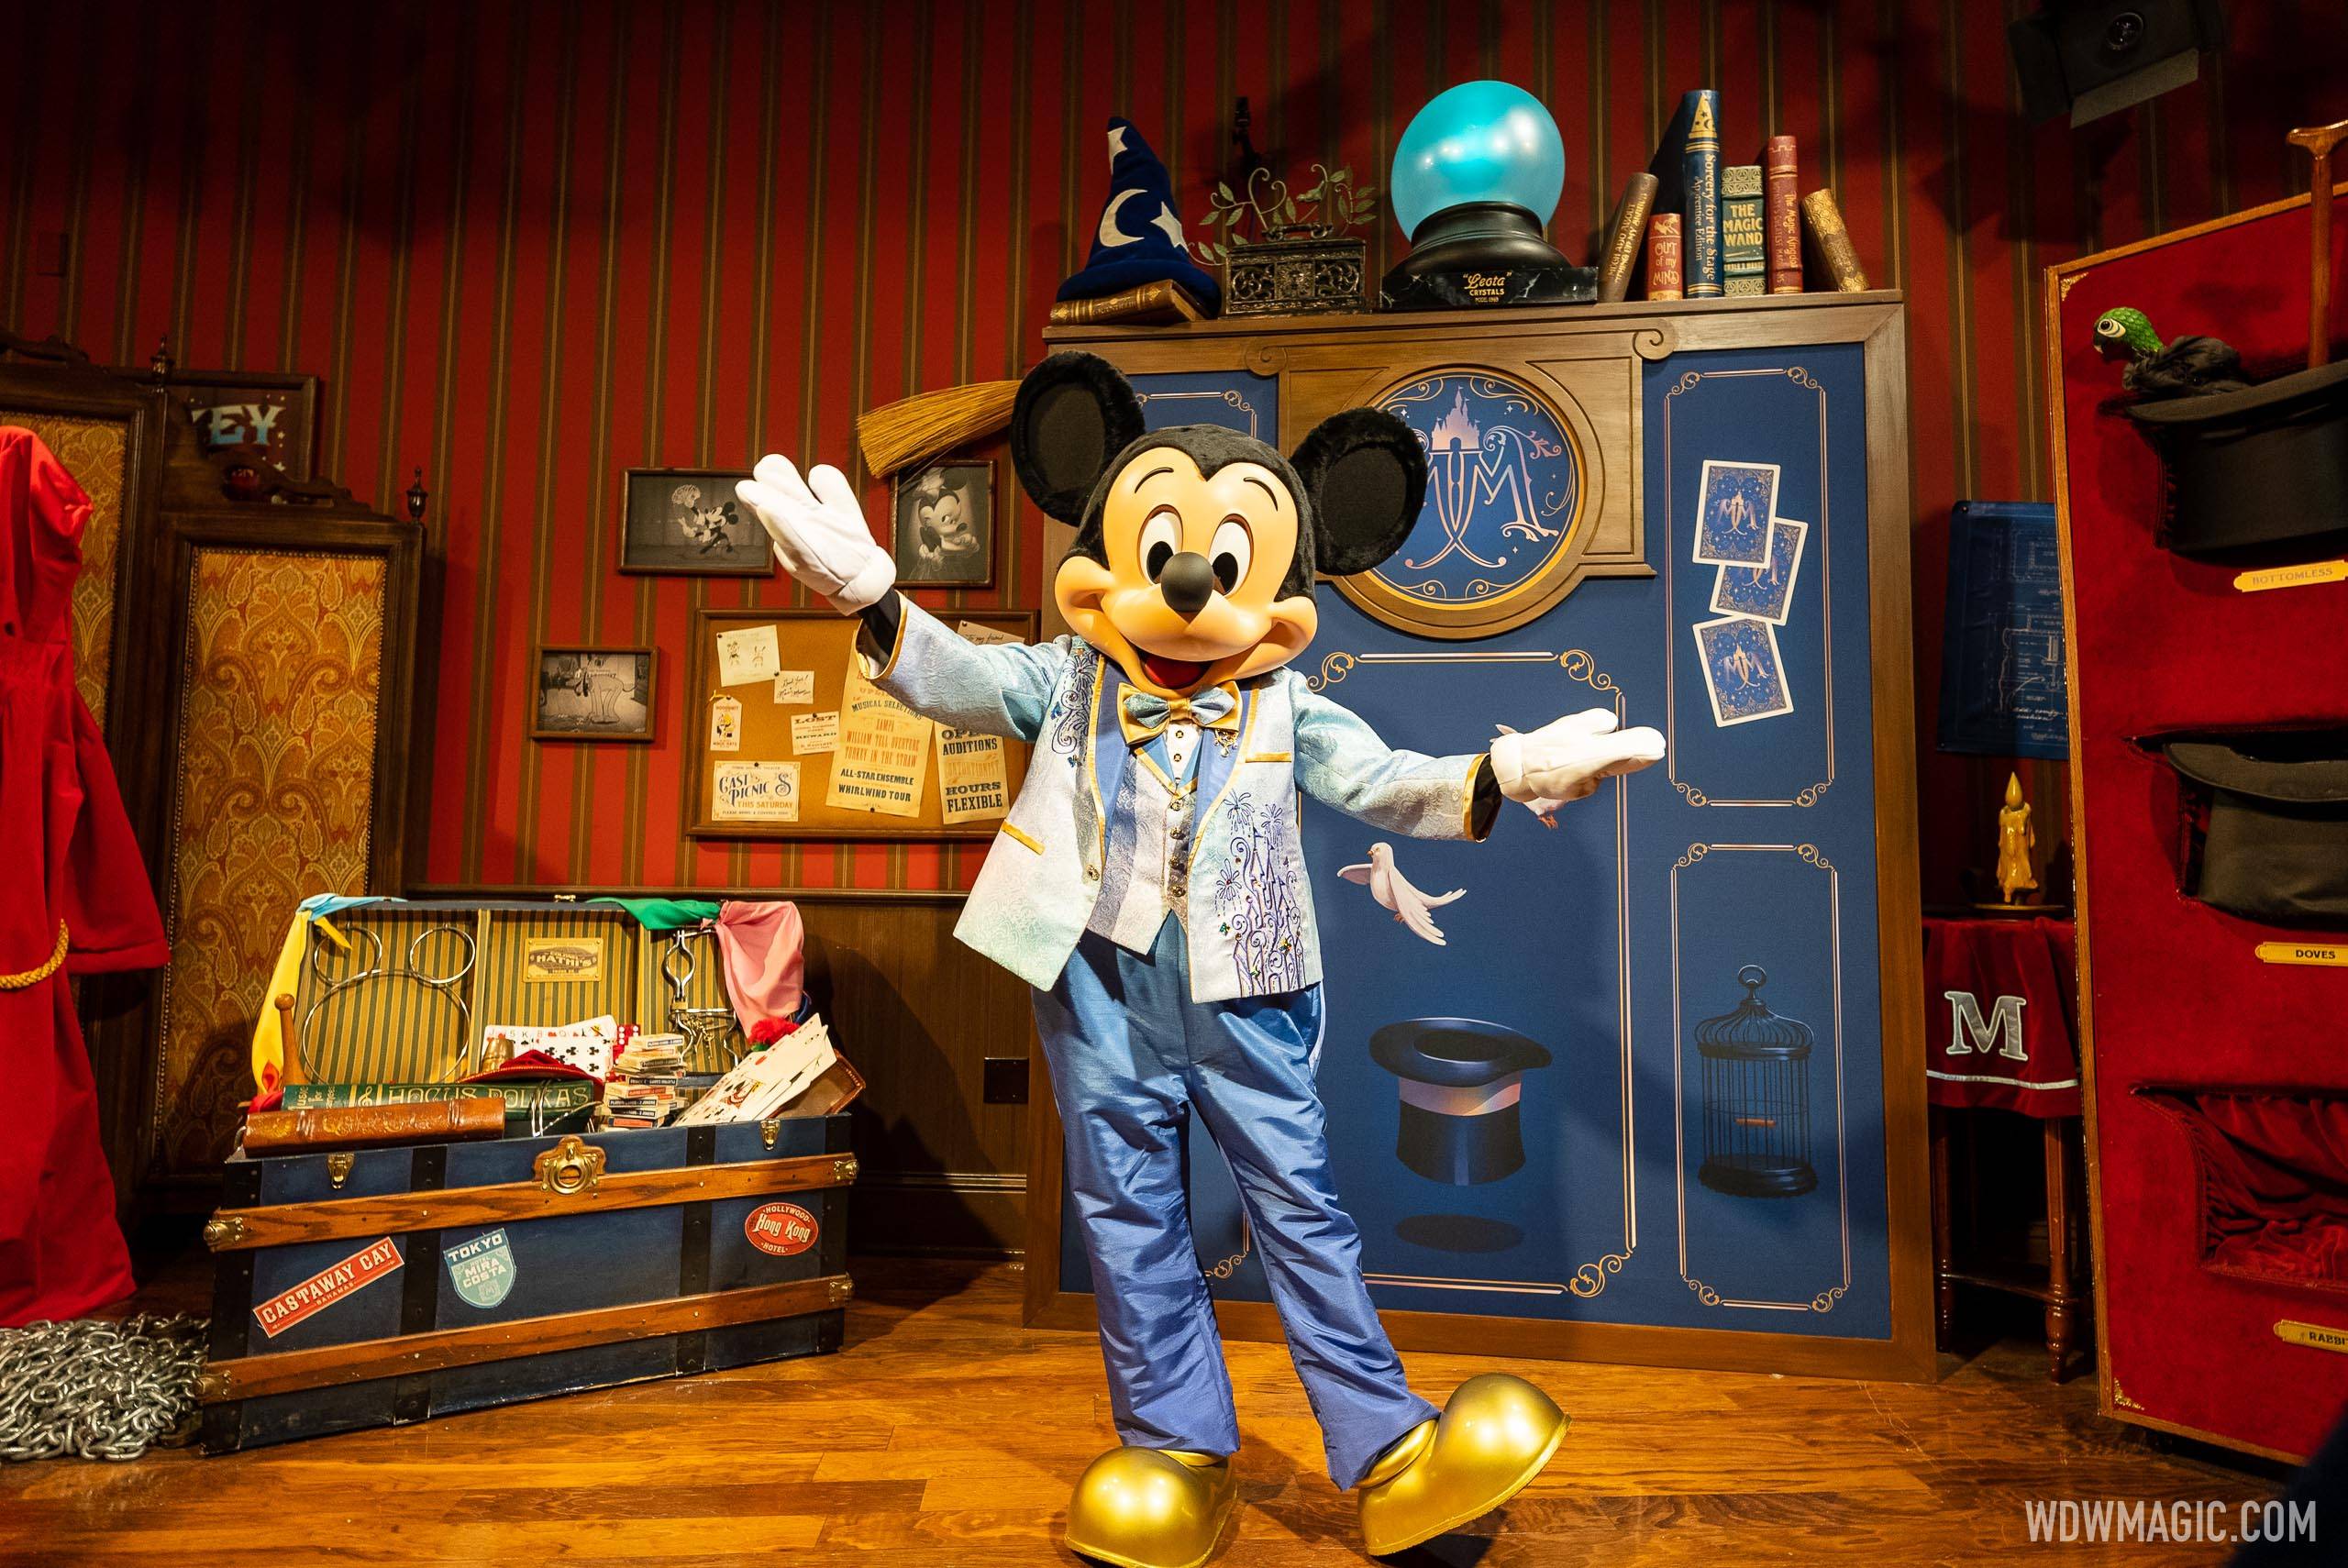 Disney officially announces the return of pre-pandemic huggable character meet and greets for Walt Disney World, Disneyland, and beyond